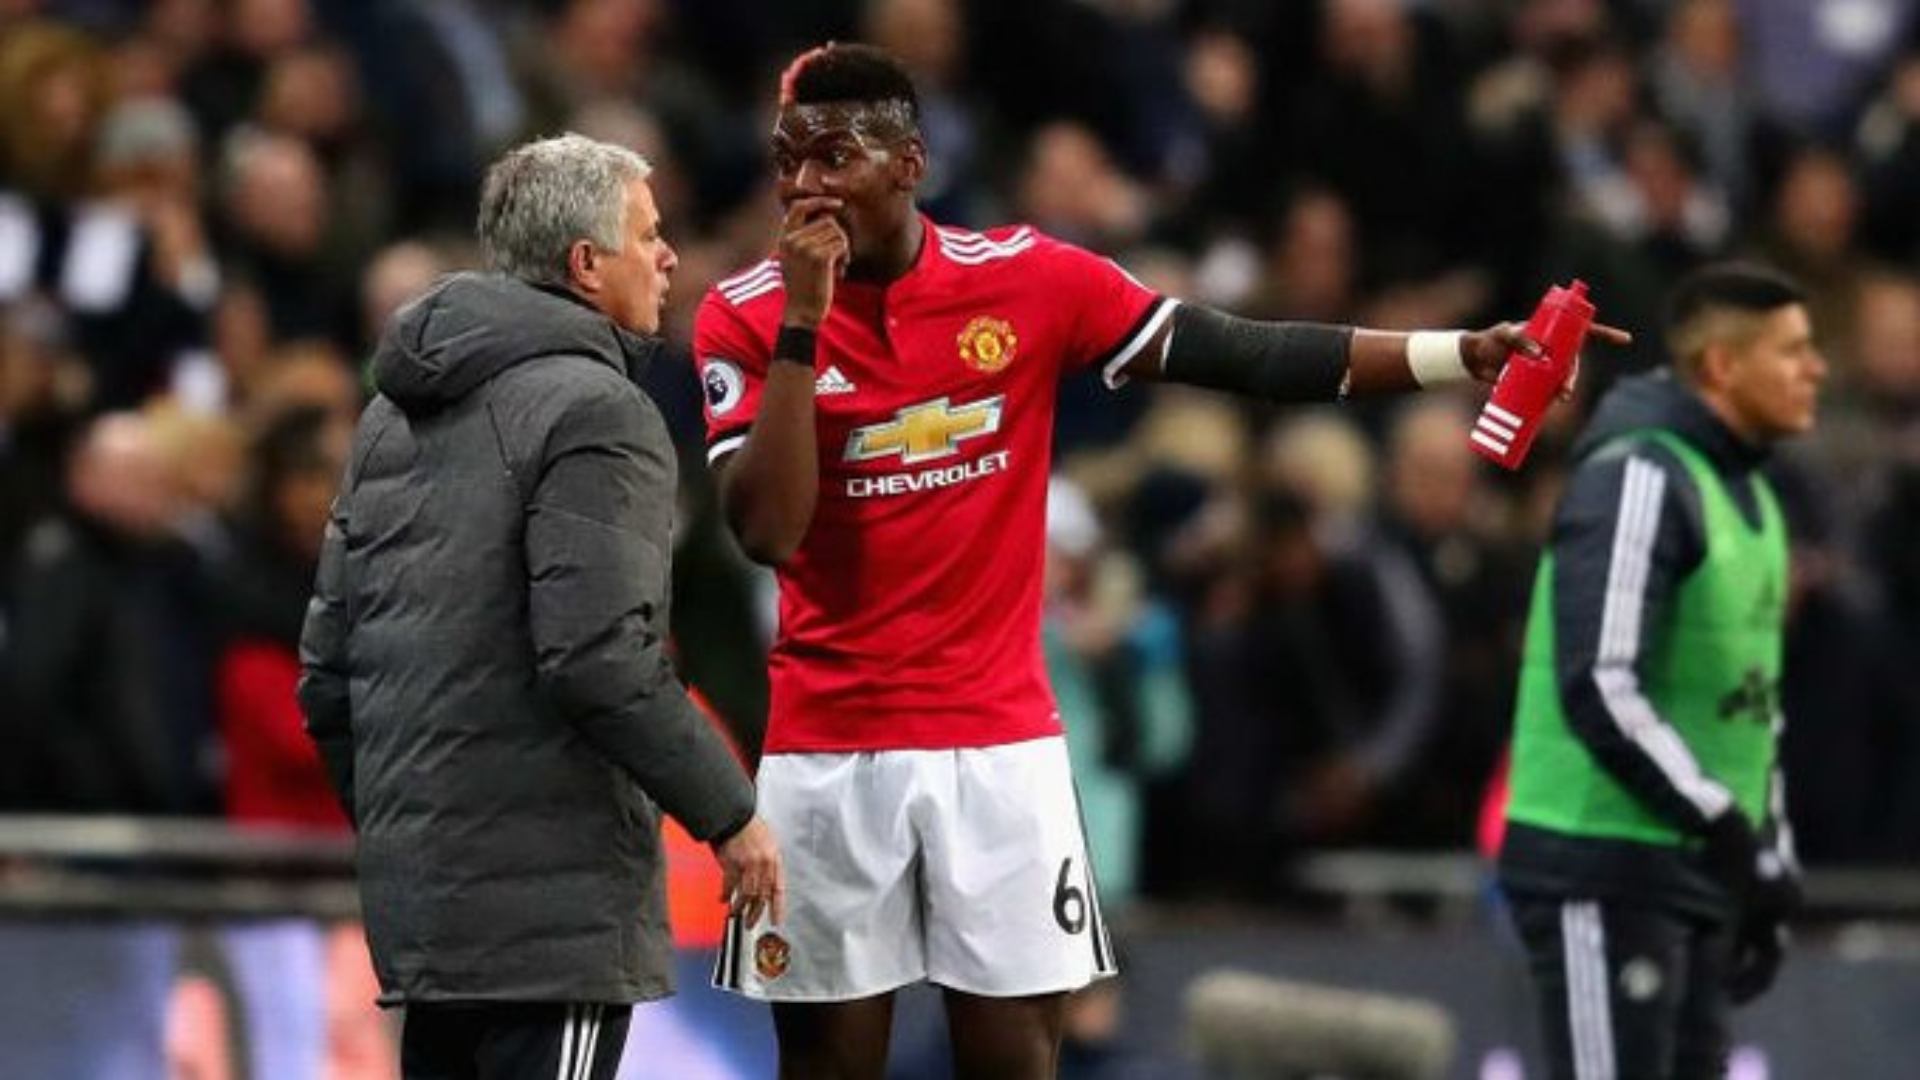 Paul Pogba has said he does not know the exact reason why his relationship with Jose Mourinho soured.